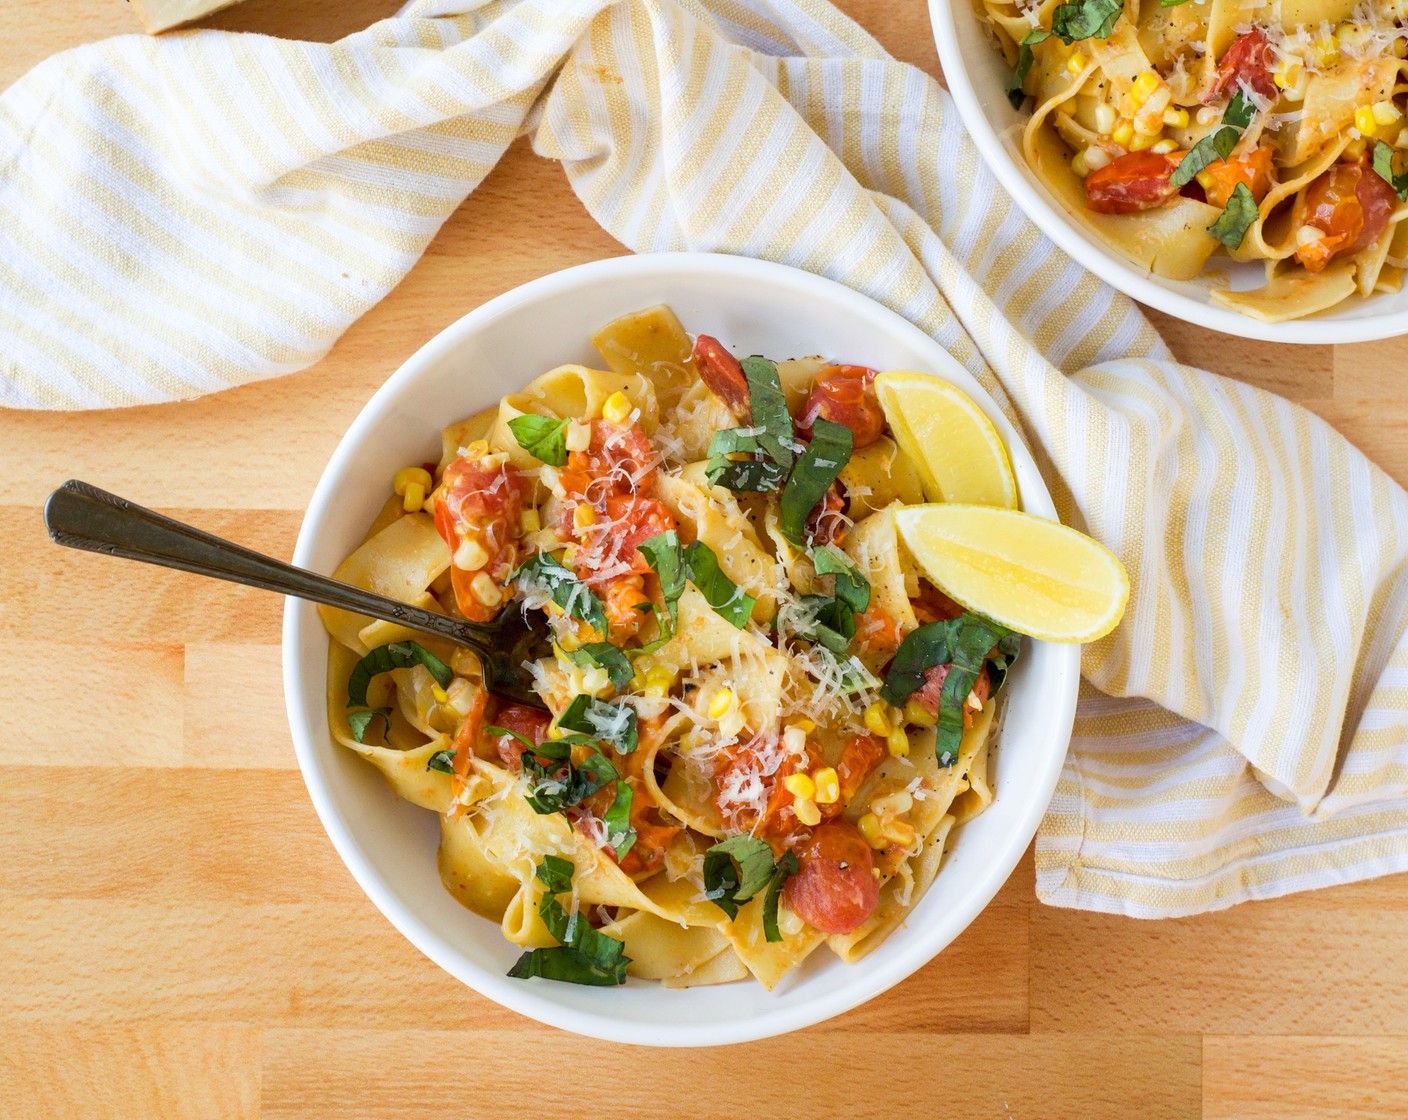 Tagliatelle with Blistered Cherry Tomatoes, Corn, and Basil